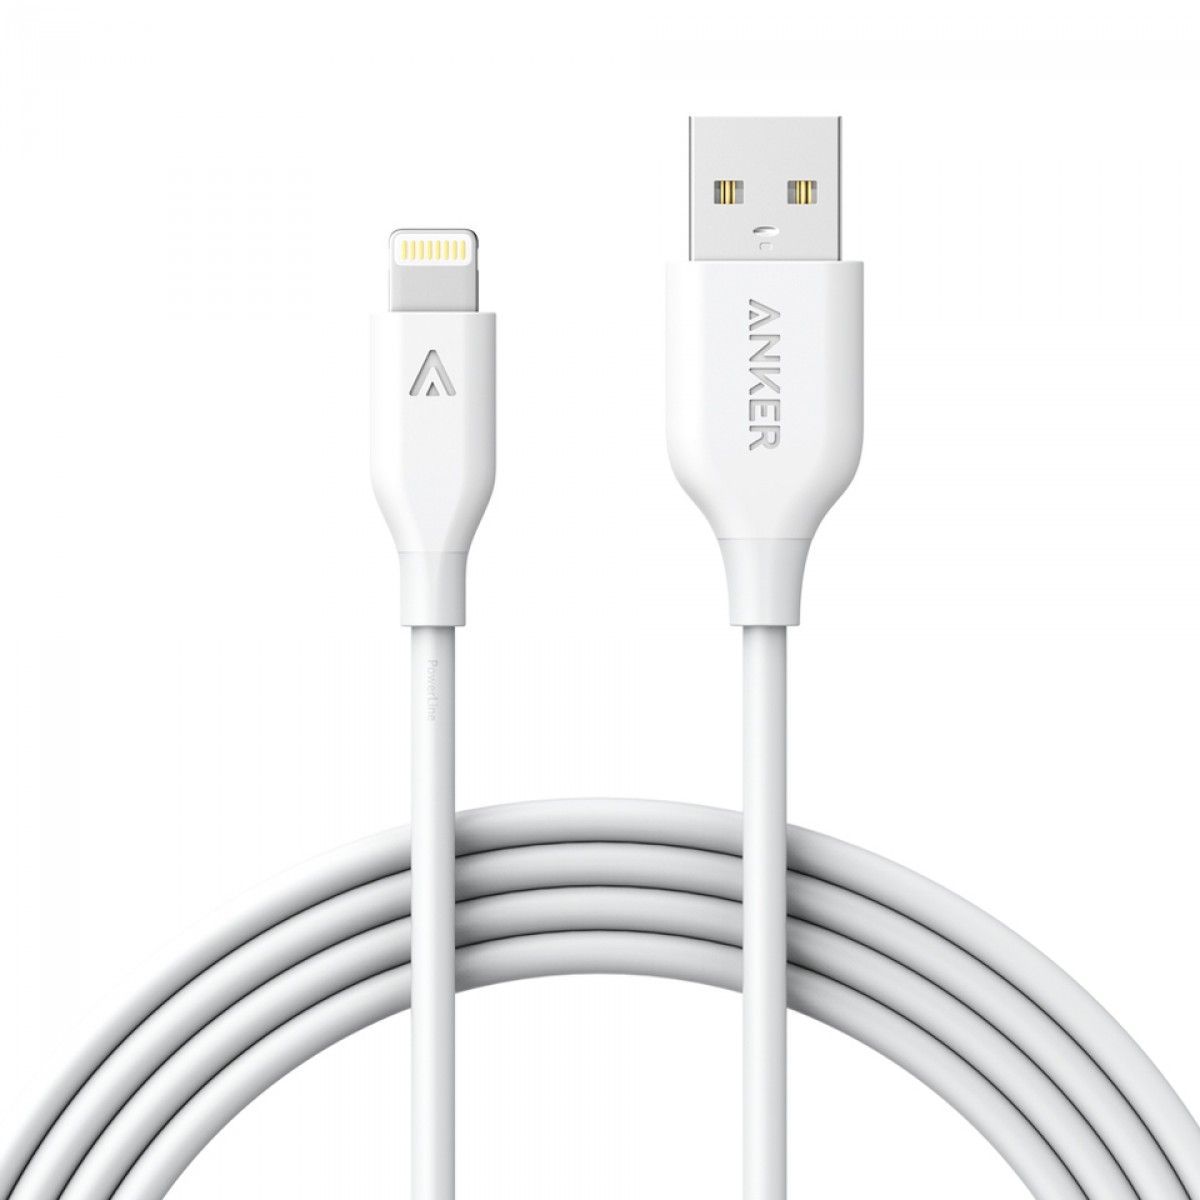 Anker PowerLine Lightning USB Cable 6ft White (A8112H21)